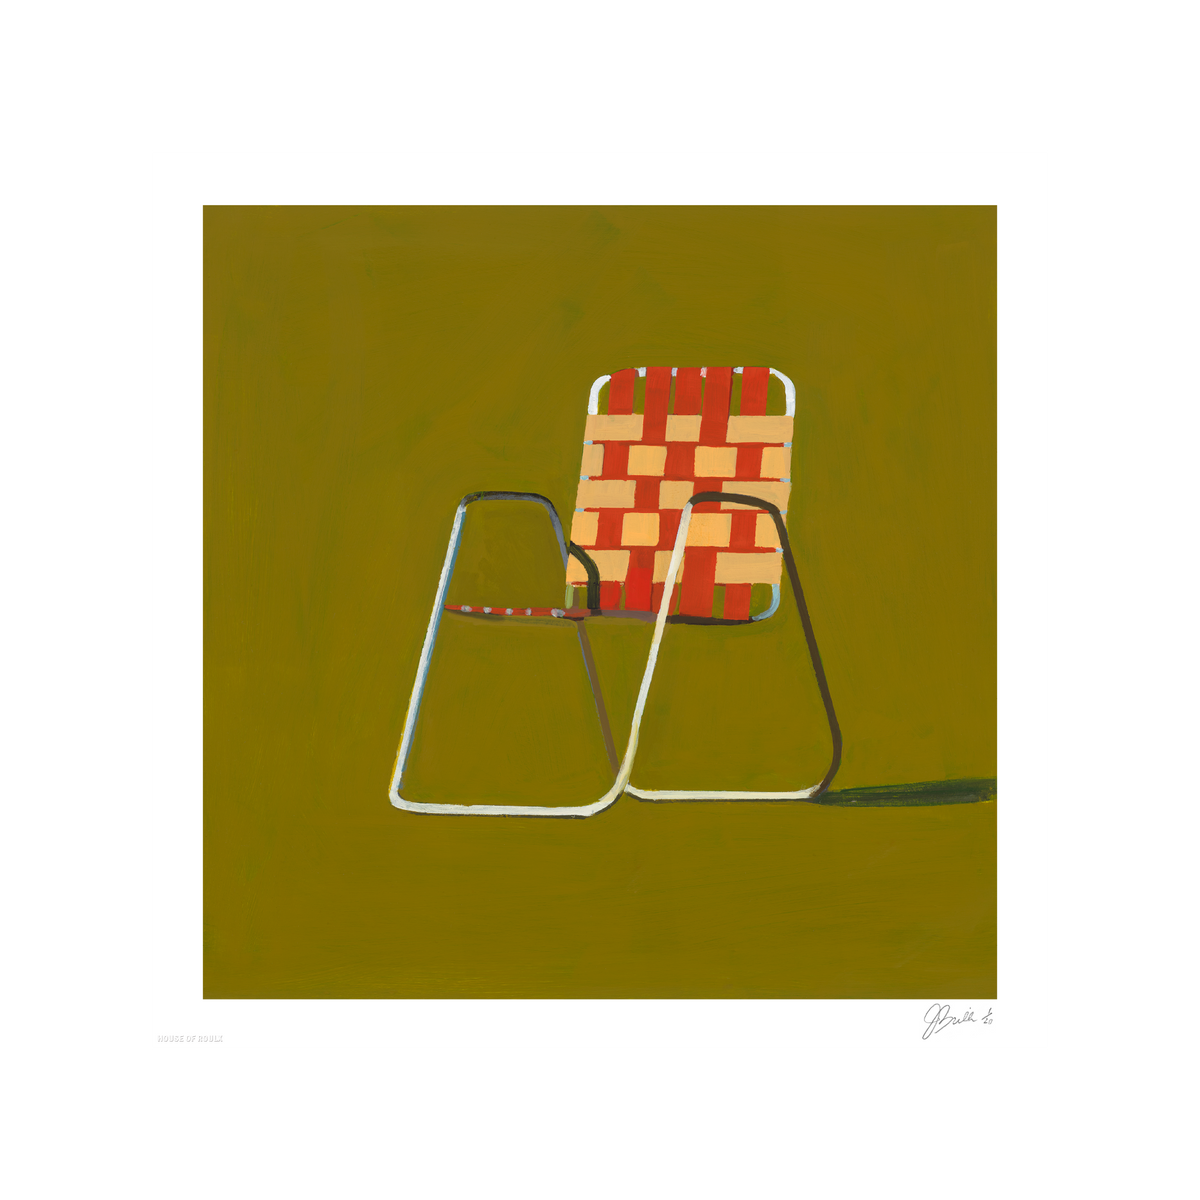 Jessica Brilli &quot;Red Lawn Chair&quot; - Archival Print, Limited Edition of 20 - 12 x 12&quot;